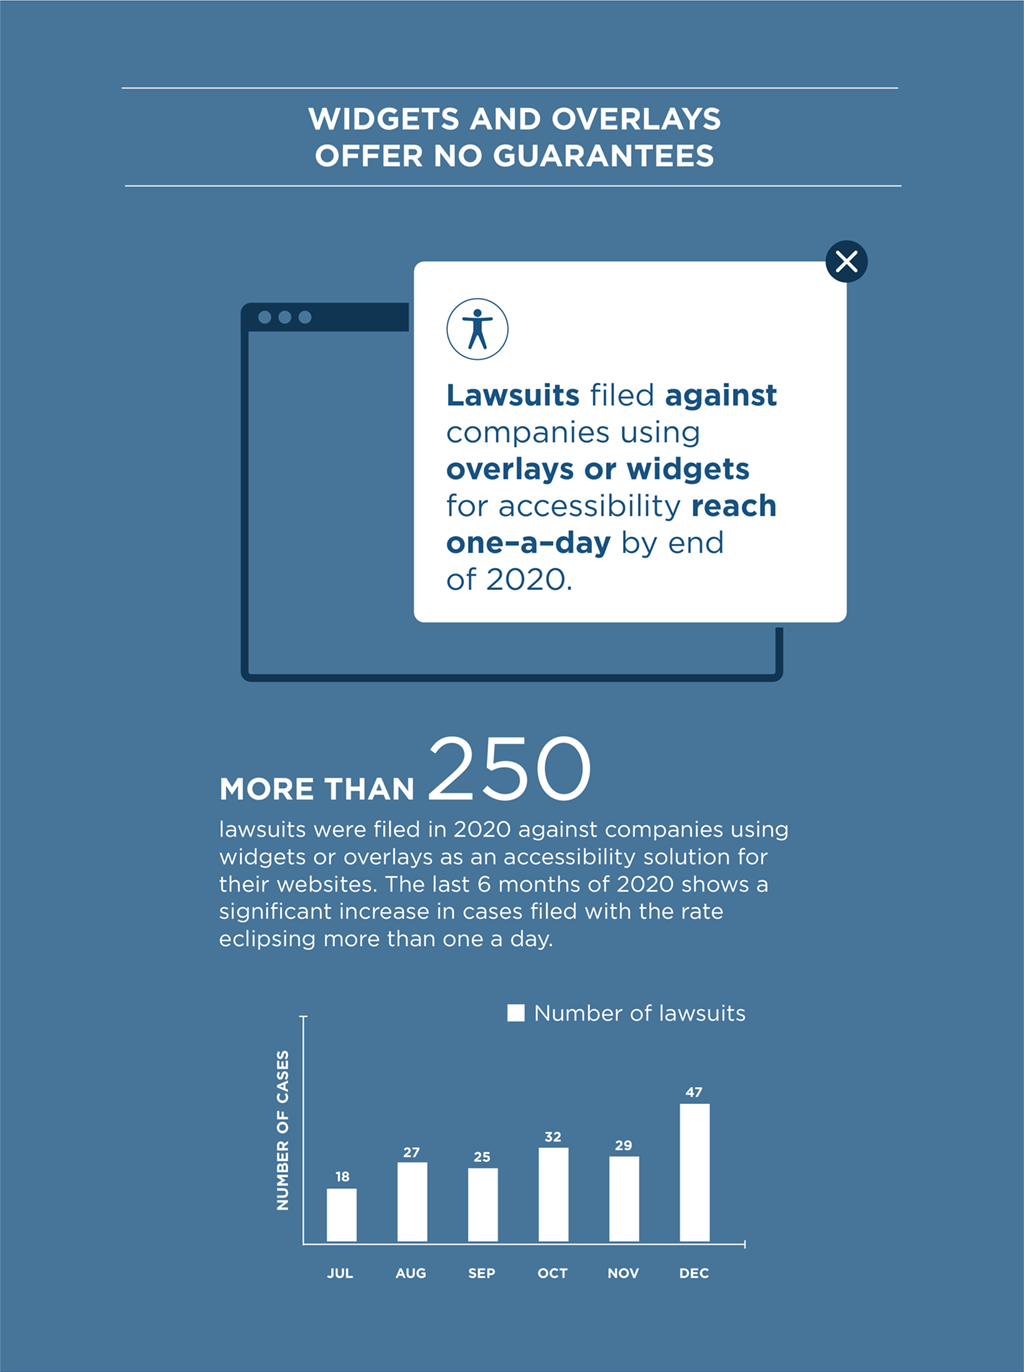 Image Description: Webpage design reads “Lawsuits filed against companies using overlays or widgets for accessibility reach one-a-day by end of 2020.” Bar chart shows the number of lawsuits against companies with widgets and overlays from July through December 2020. July had 18 cases, August had 27, September had 25, October had 32, November had 29, and December had 47.   Text reads: More than 250 lawsuits were filed in 2020 against companies using widgets or overlays as an accessibility solution for their websites. The last 6 months of 2020 shows a significant increase in cases filed with the rate eclipsing more than one a day. 